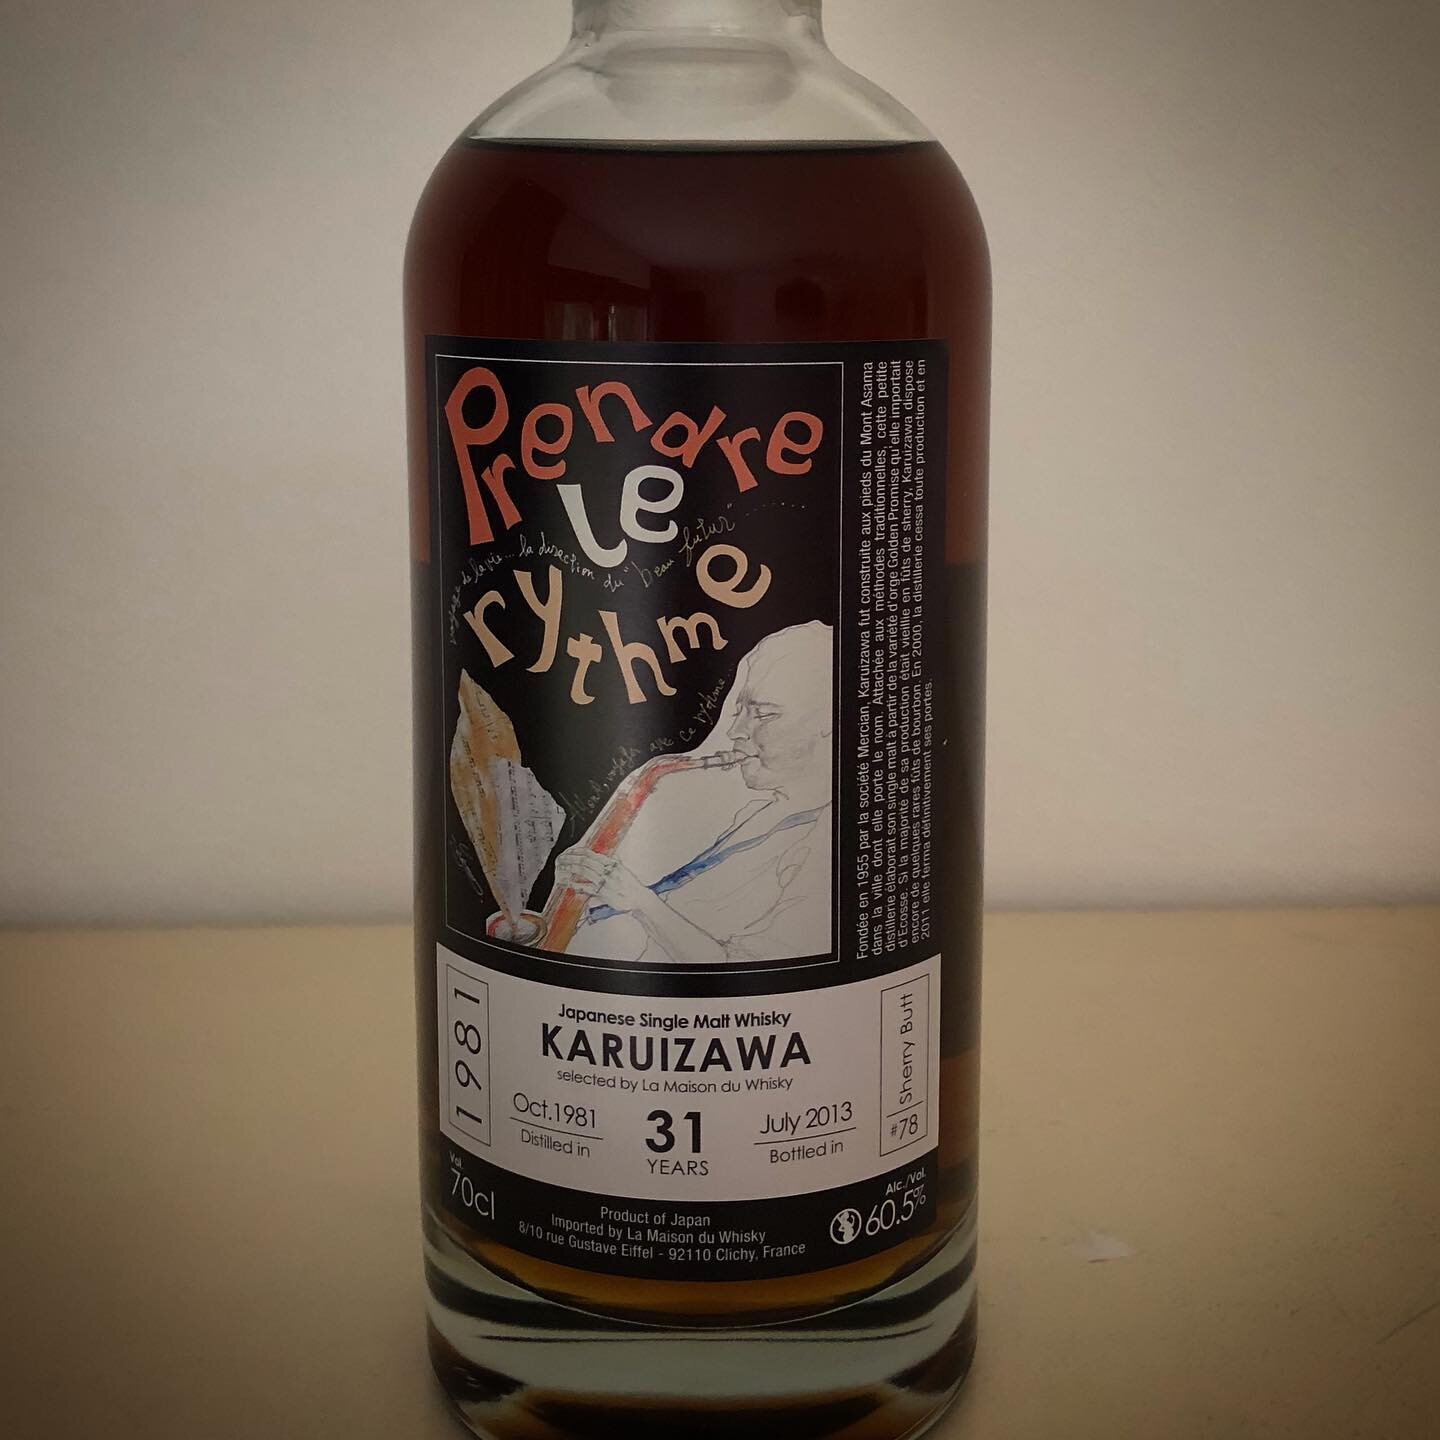 After all those years it&rsquo;s still sad they will never produce this great malt anymore
.
#karuizawa #karuizawawhisky #karuizawadistillery #closeddistillery #japanesewhisky #rarejapanesewhisky #whiskycollector #whiskycollection #oldwhisky #rarewhi